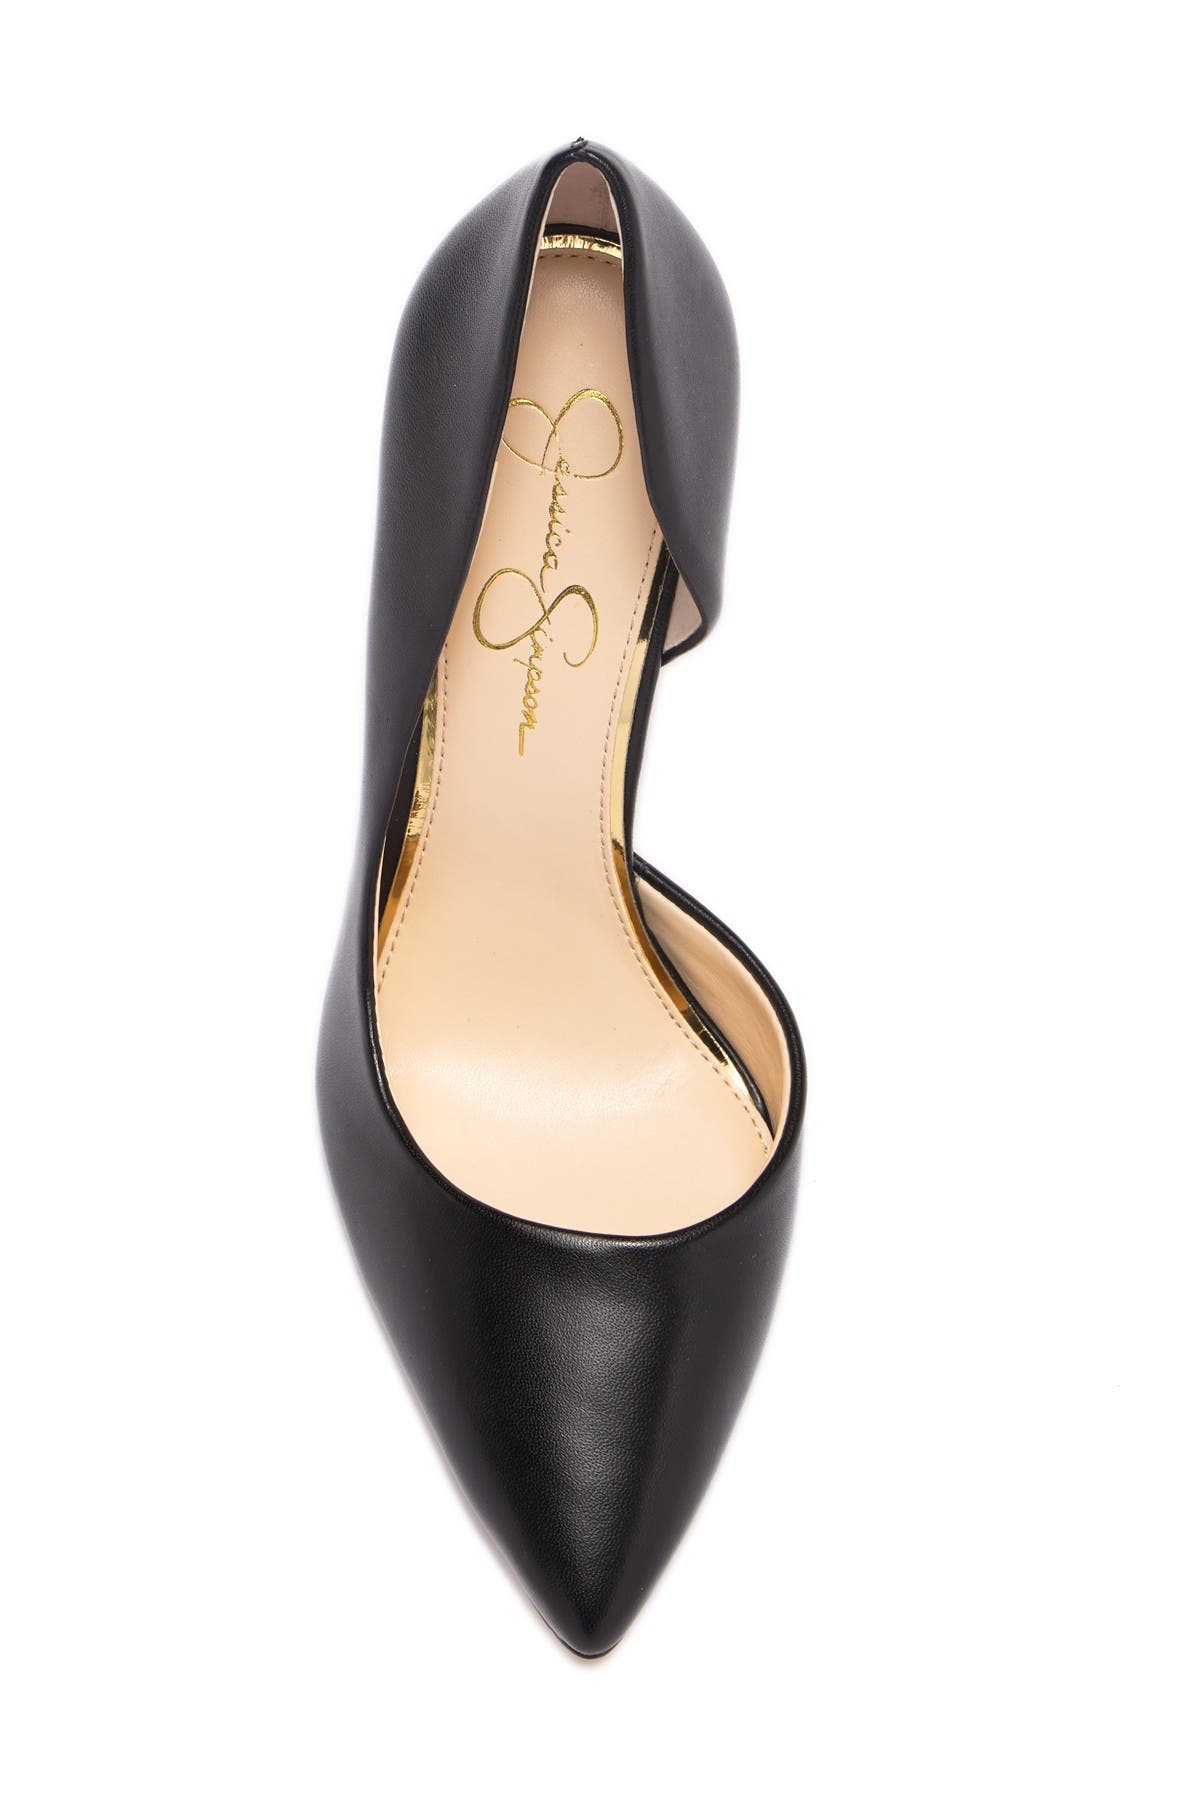 Jessica Simpson | Paryn d'Orsay Pointed 